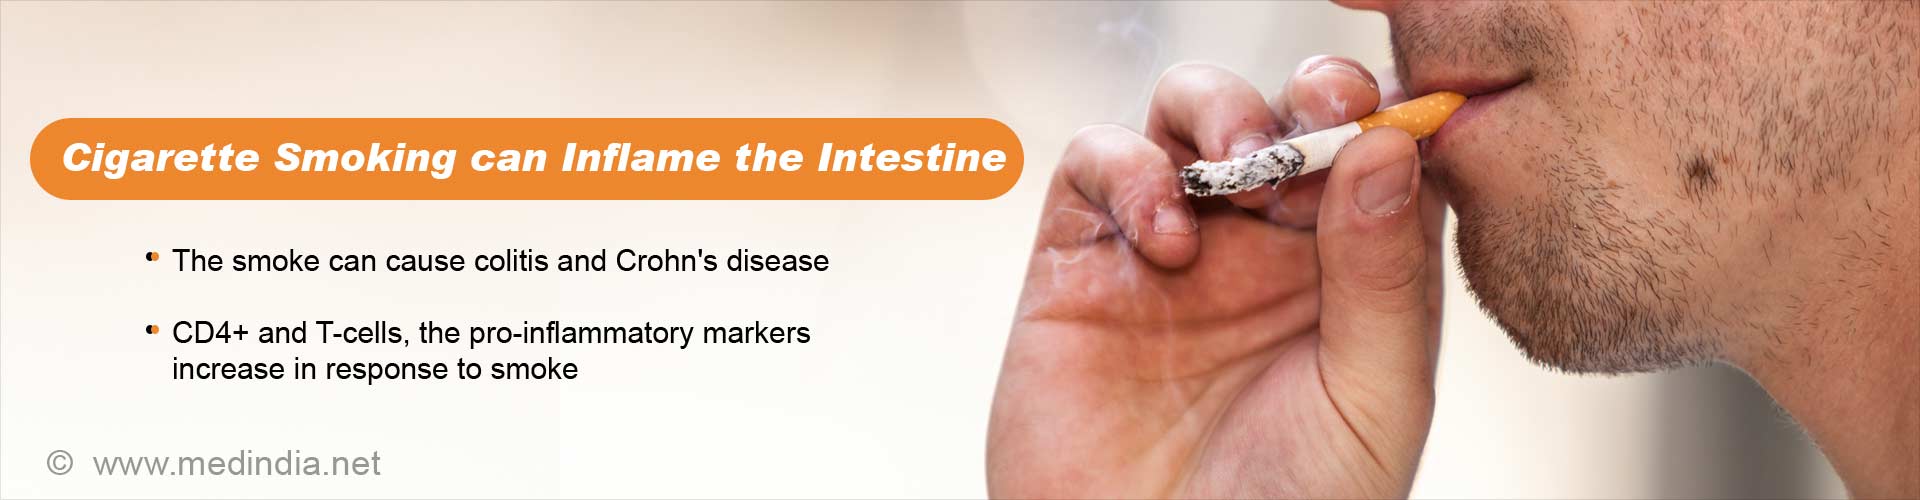 cigarette smoking can inflame the intestine
- the smoke can cause colitis and Crohn's disease
- CD4+ and T-cells, the pro-inflammatory markers increase in response to smoke